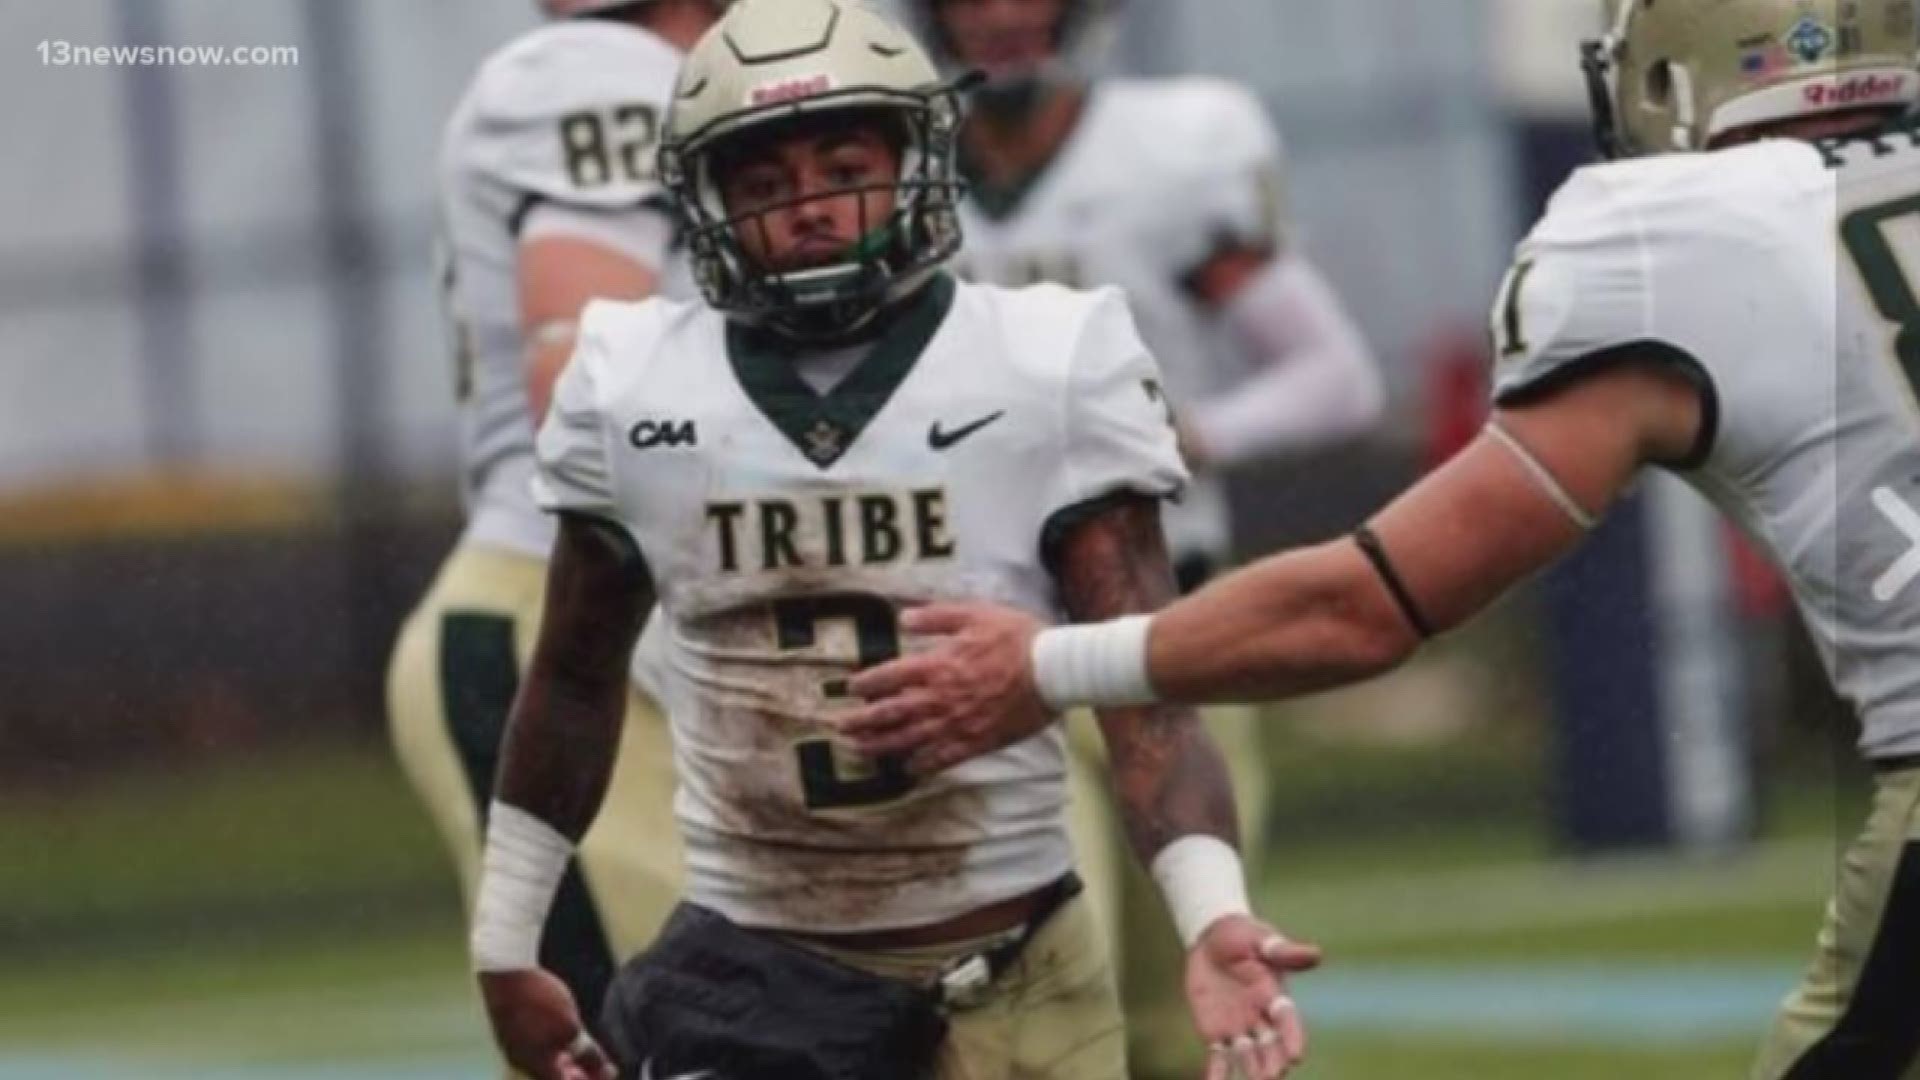 New search warrants claim a drug deal may be at the center of the William & Mary football player's death, but those who know Evans said that's hard to believe.